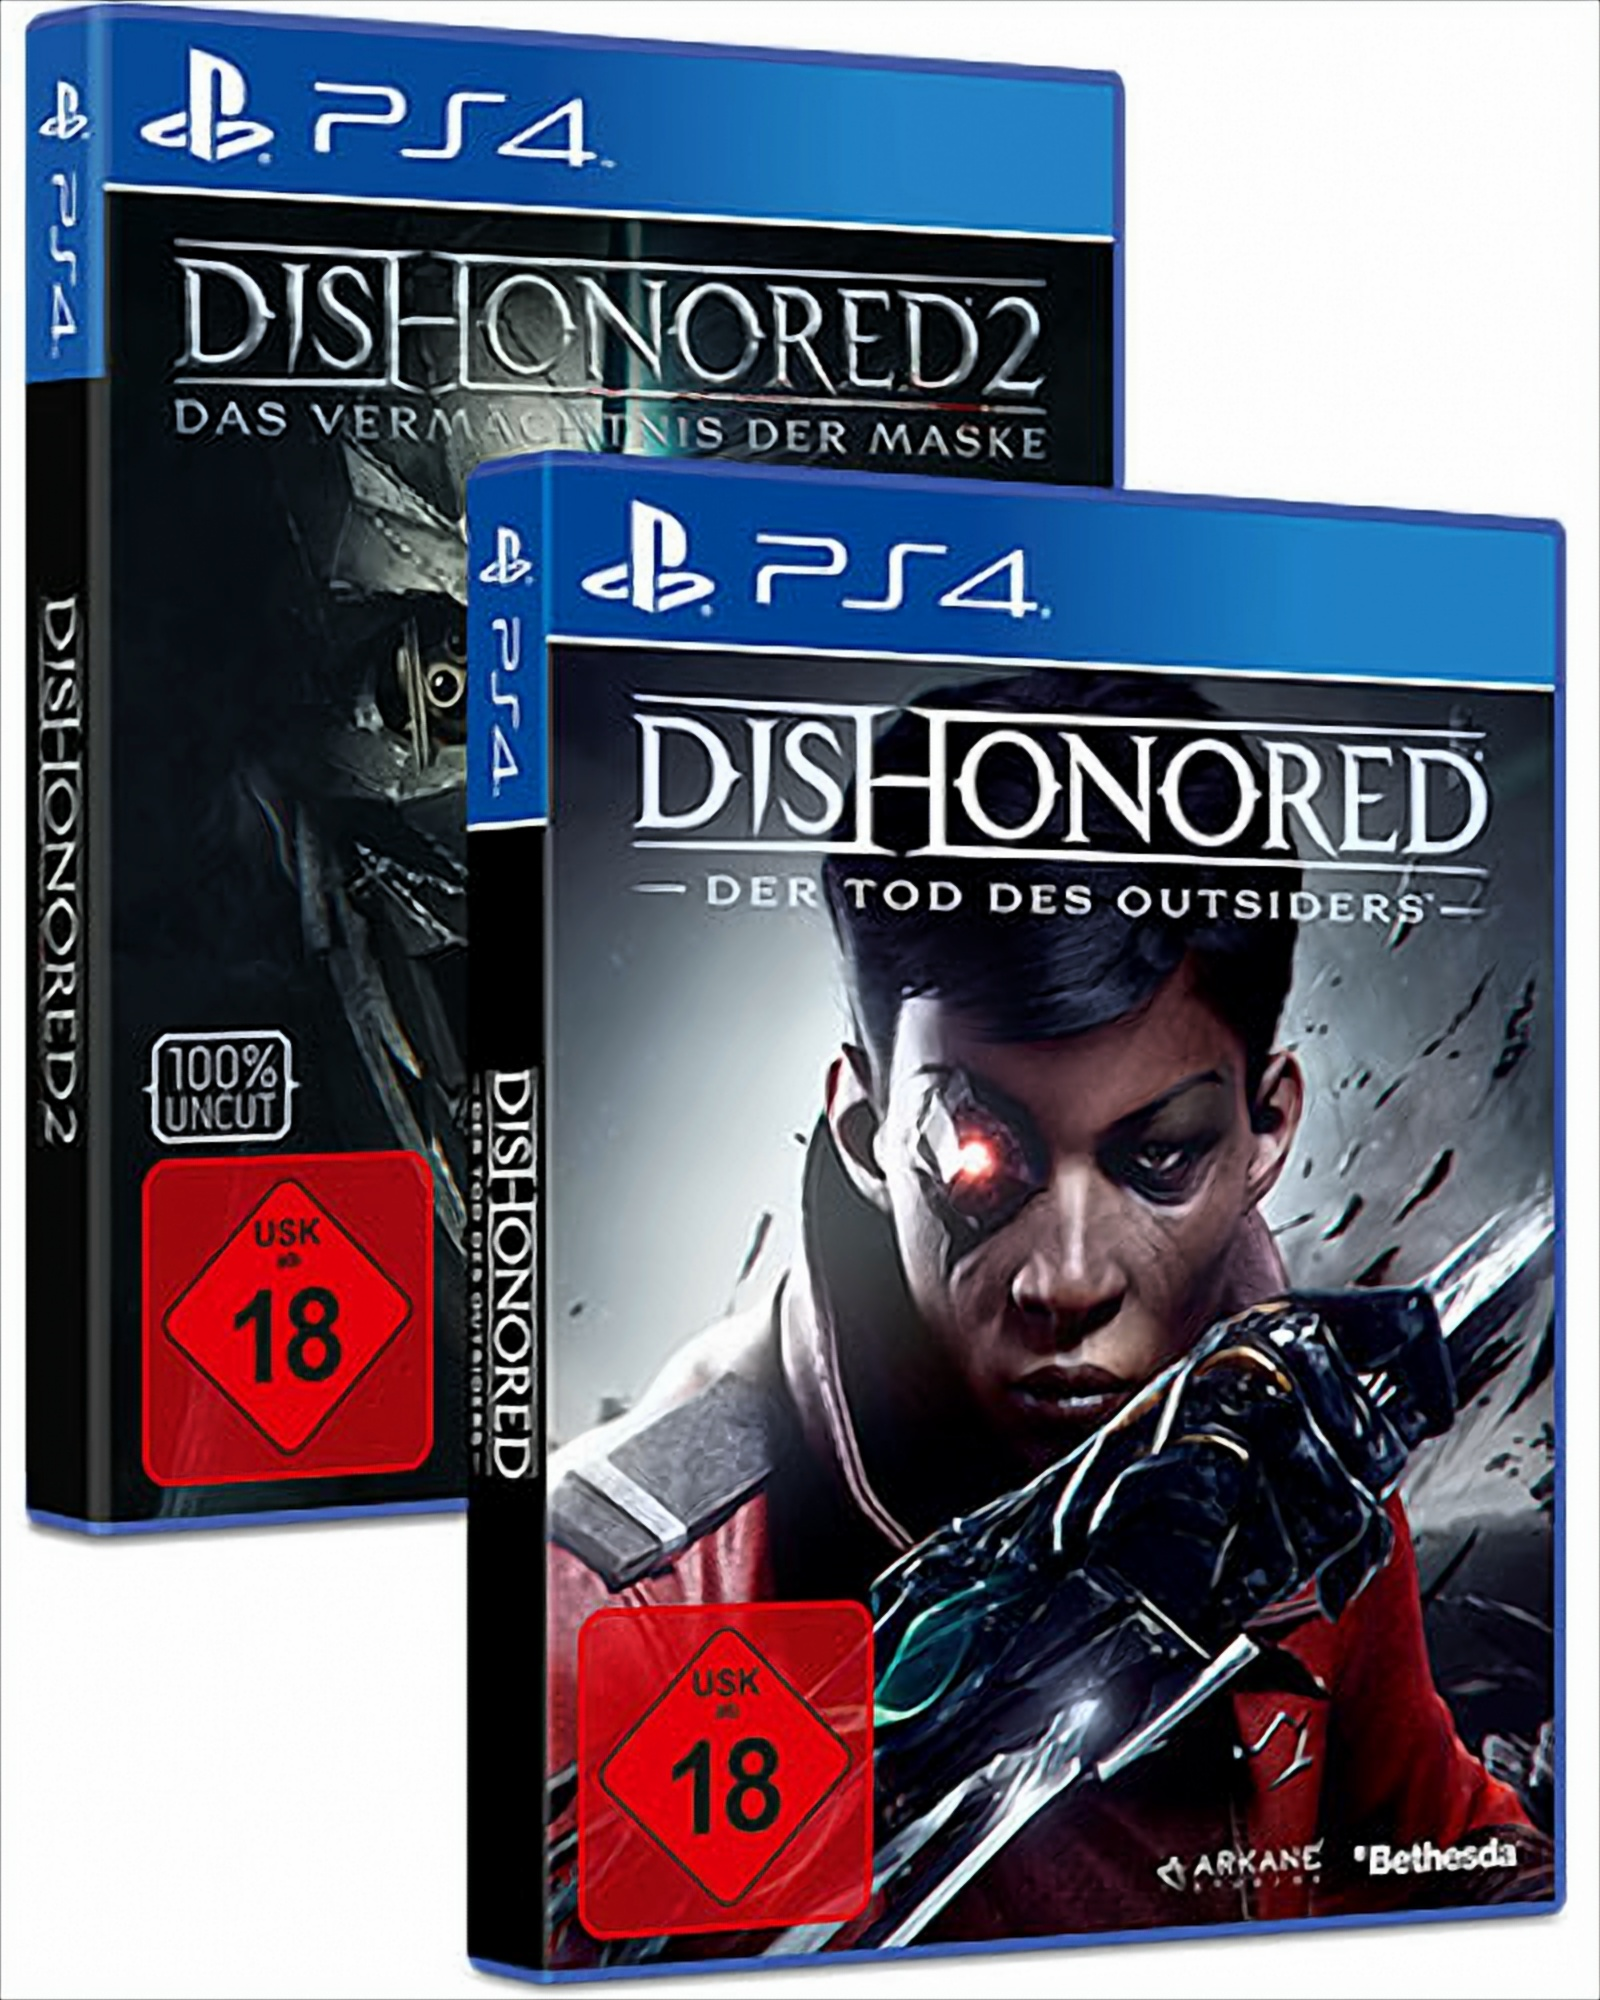 [PlayStation 2) Dishonored Feature des Tod Der - Outsiders (inkl. Double 4] Dishonored: